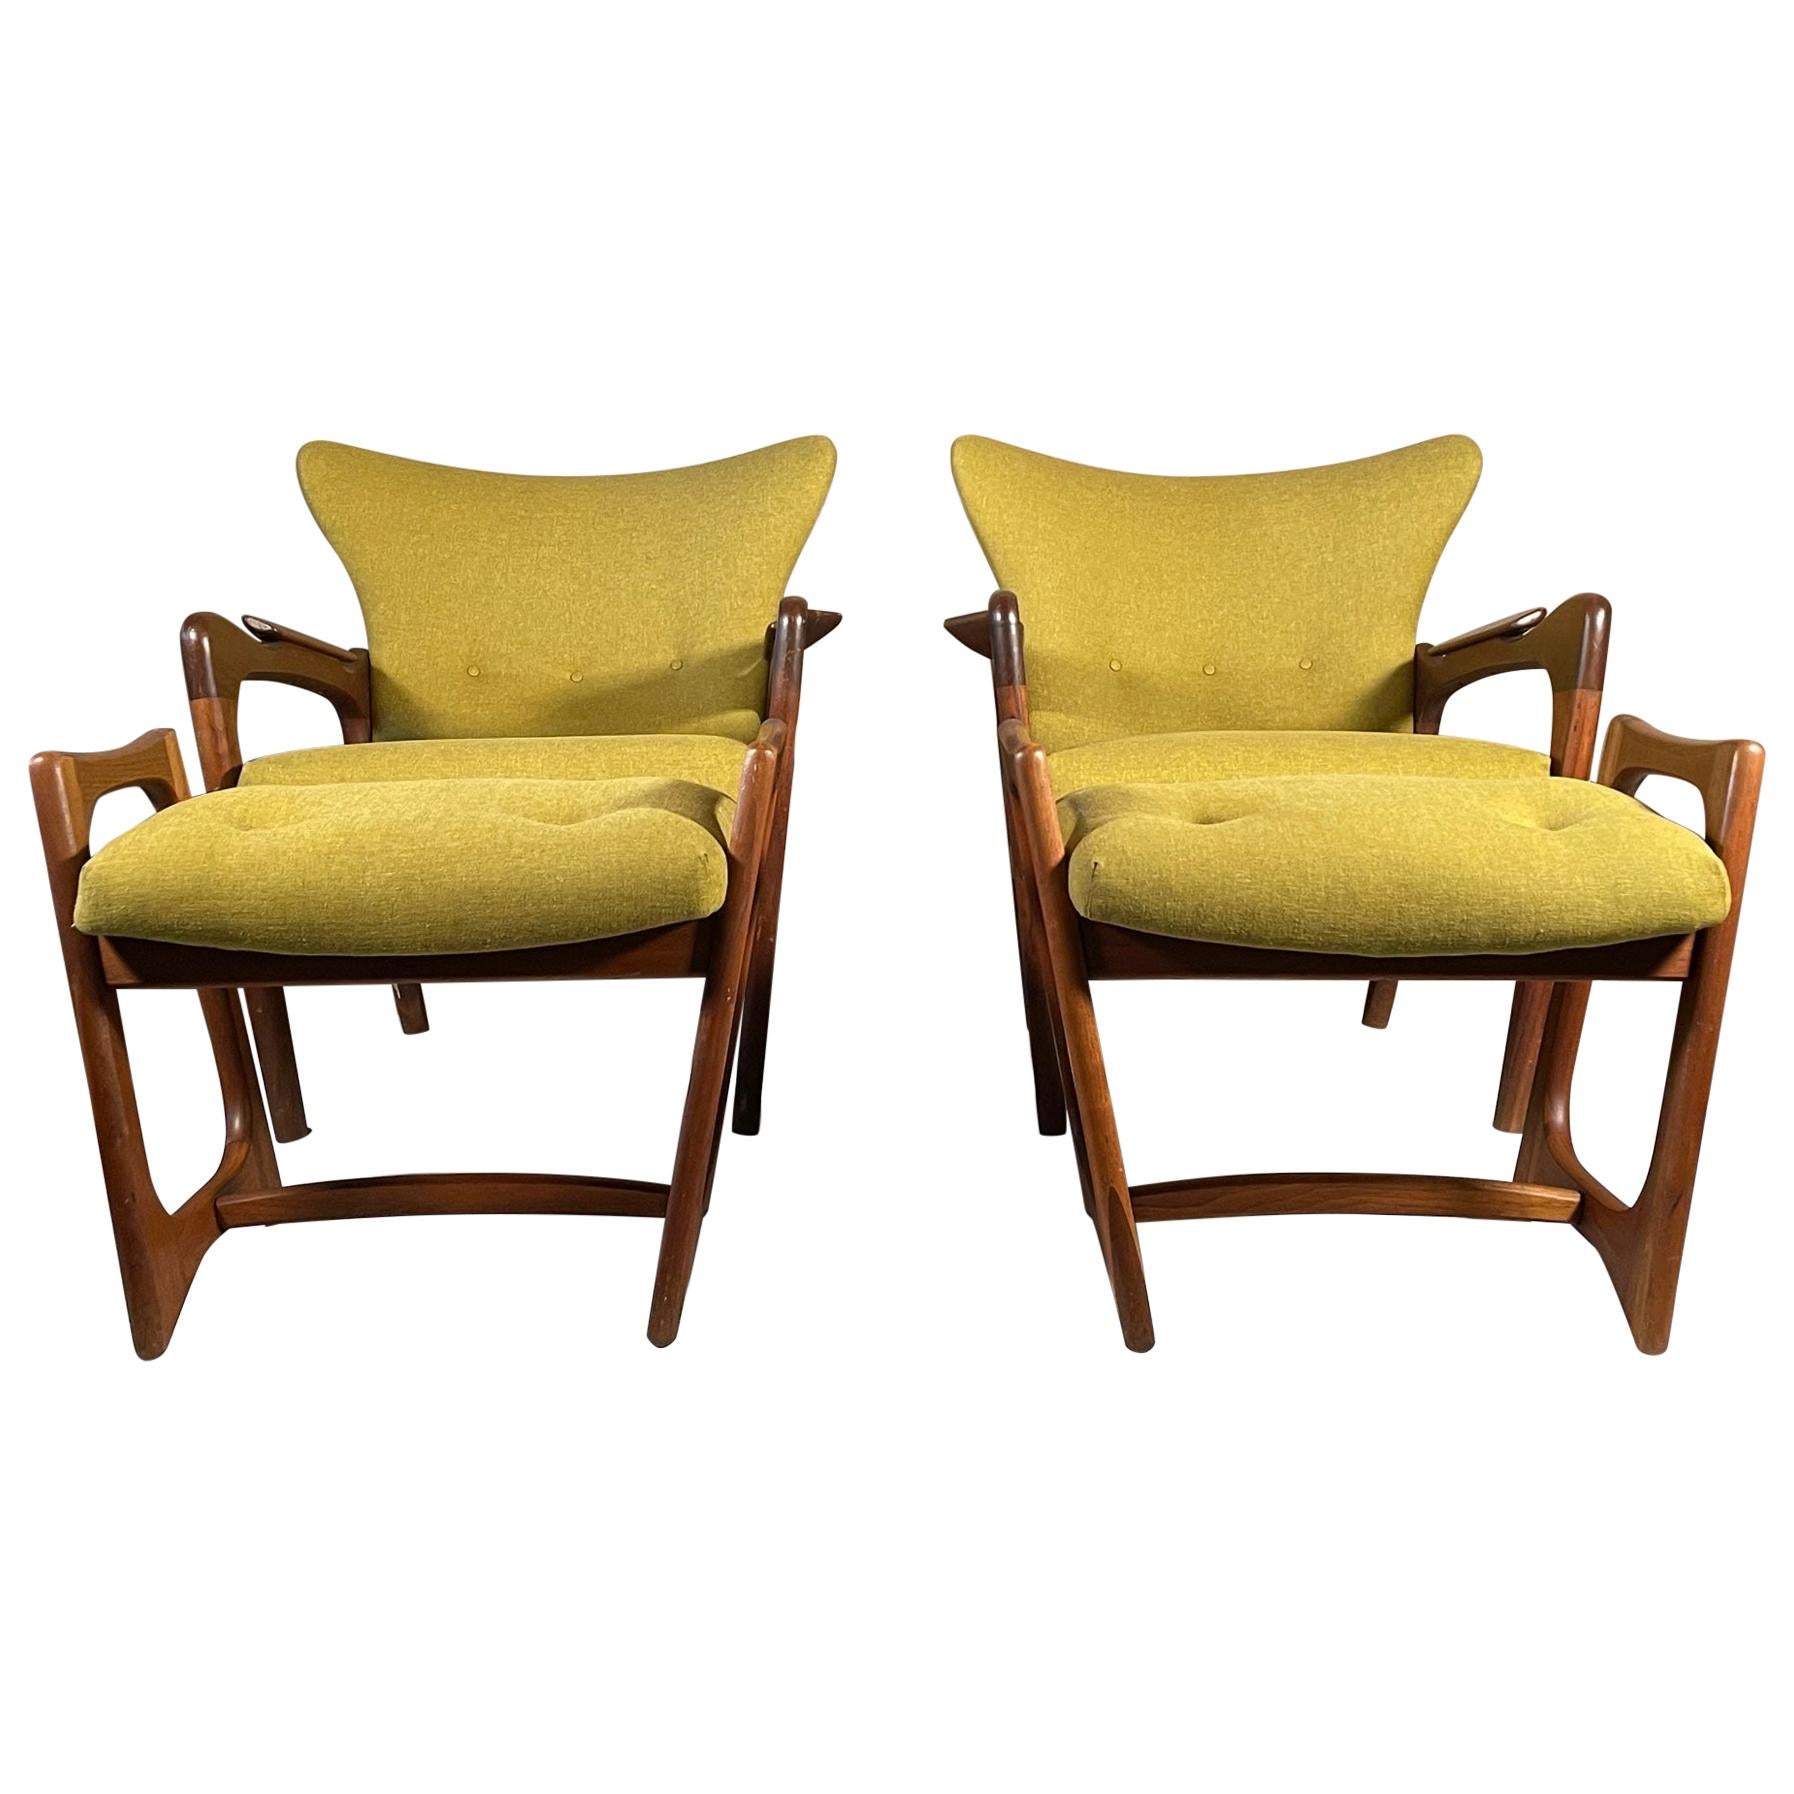 Unusual Adrian Pearsall Armchairs with Ottomans For Sale